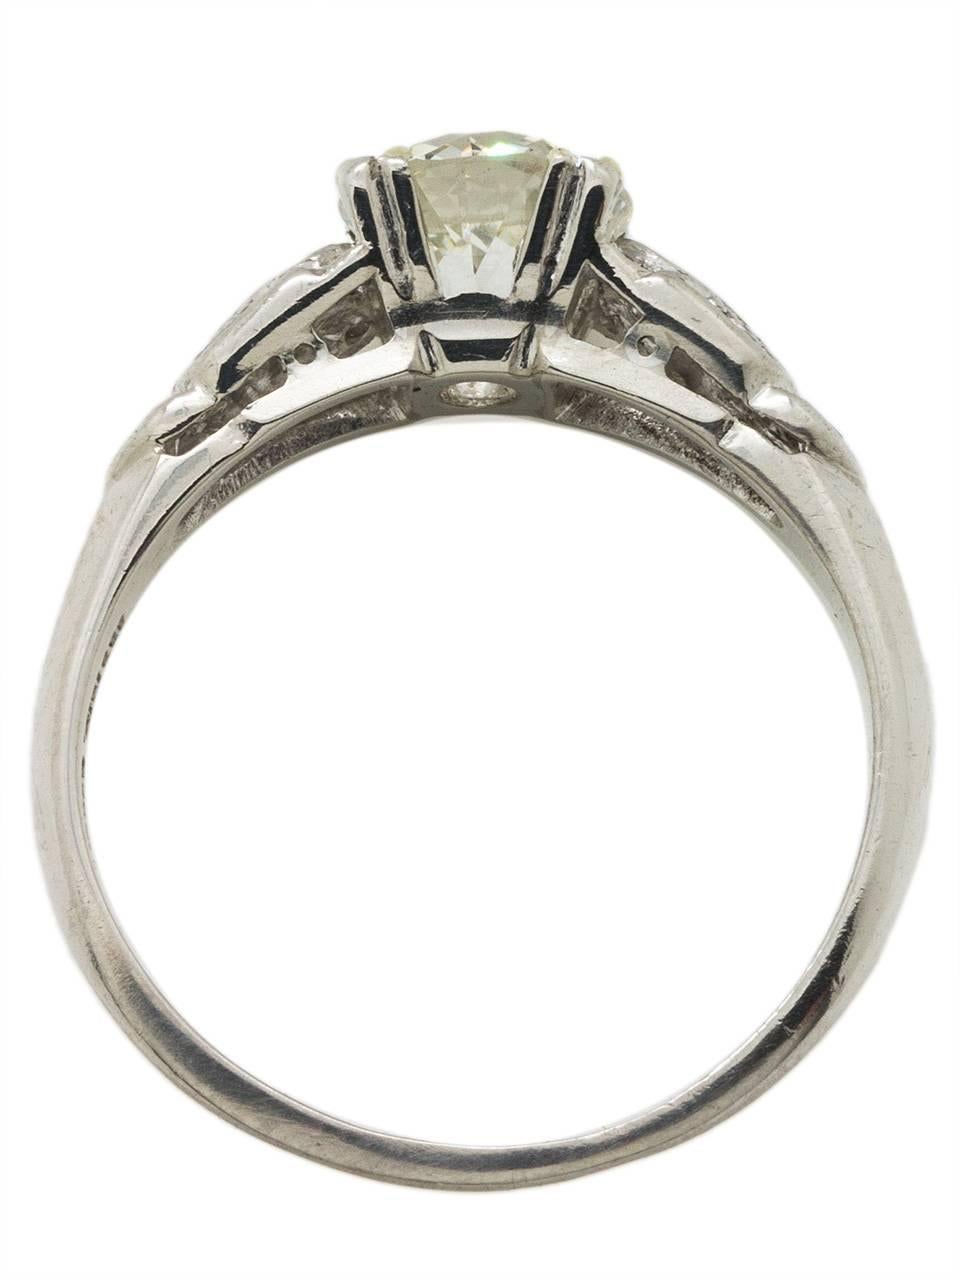 Vintage Engagement Ring Platinum 1.22 Carat I-VS2 Old European Cut, circa 1930s In Excellent Condition For Sale In West Hollywood, CA